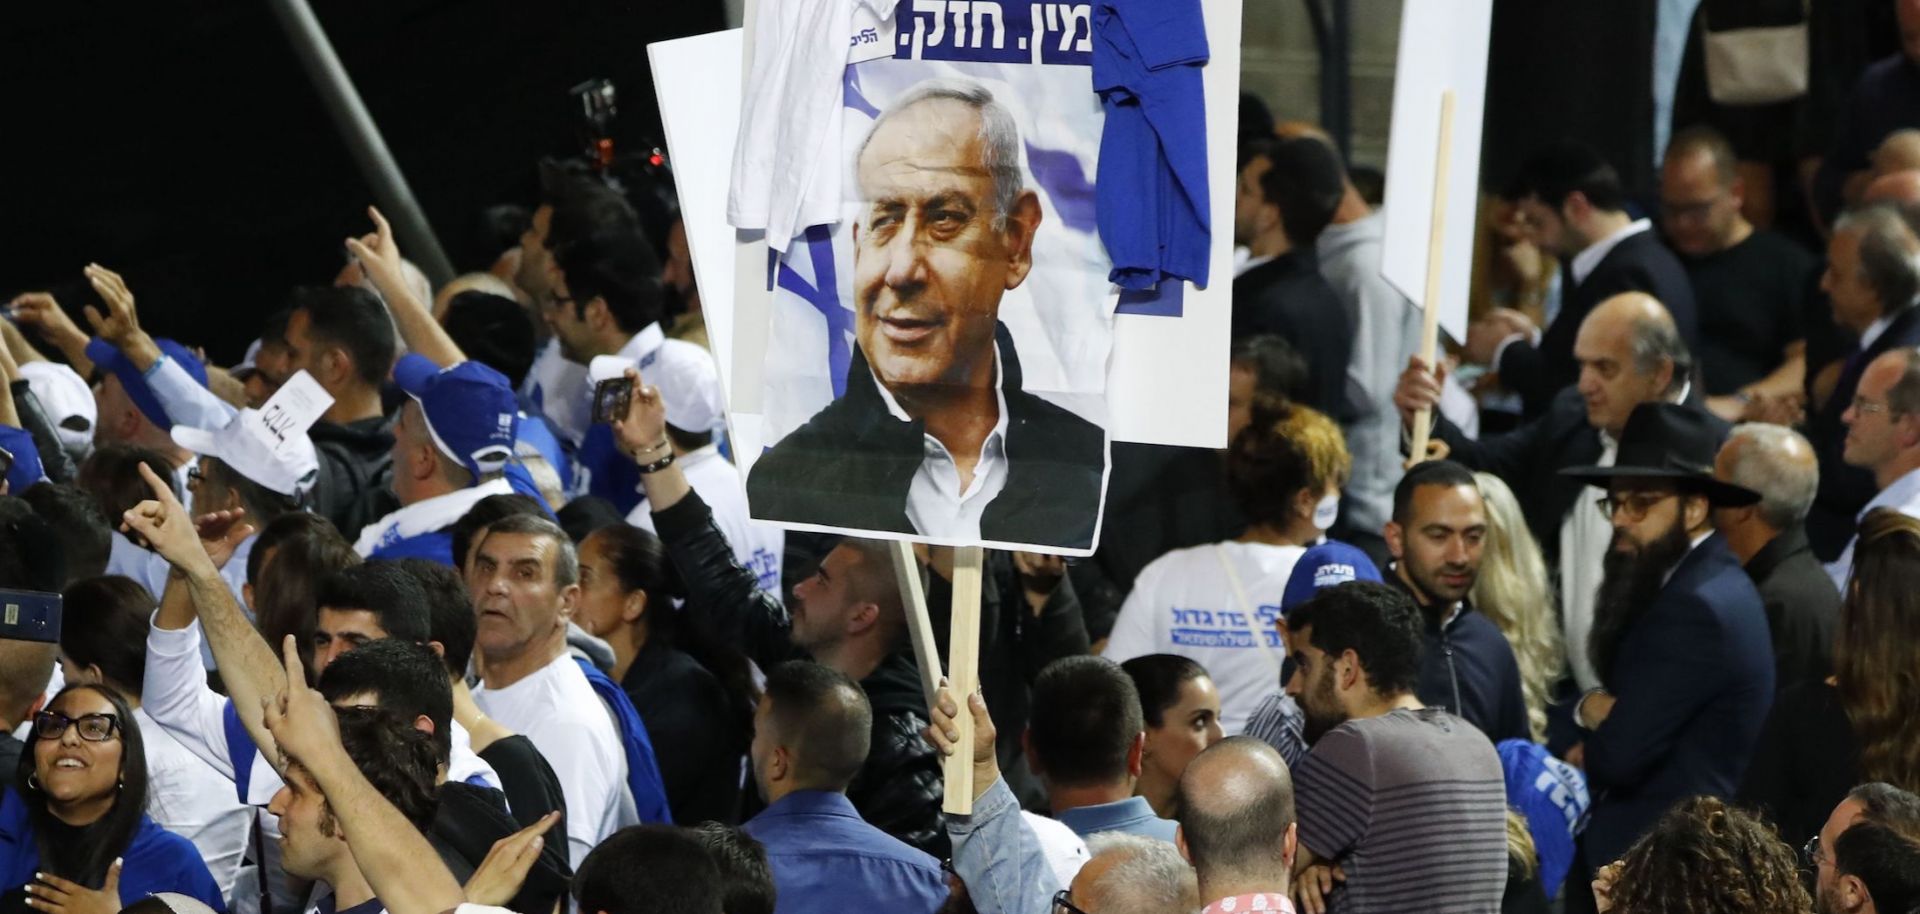 Israeli supporters of Prime Minister Benjamin Netanyahu appear to have plenty to celebrate after preliminary election results were released April 10.